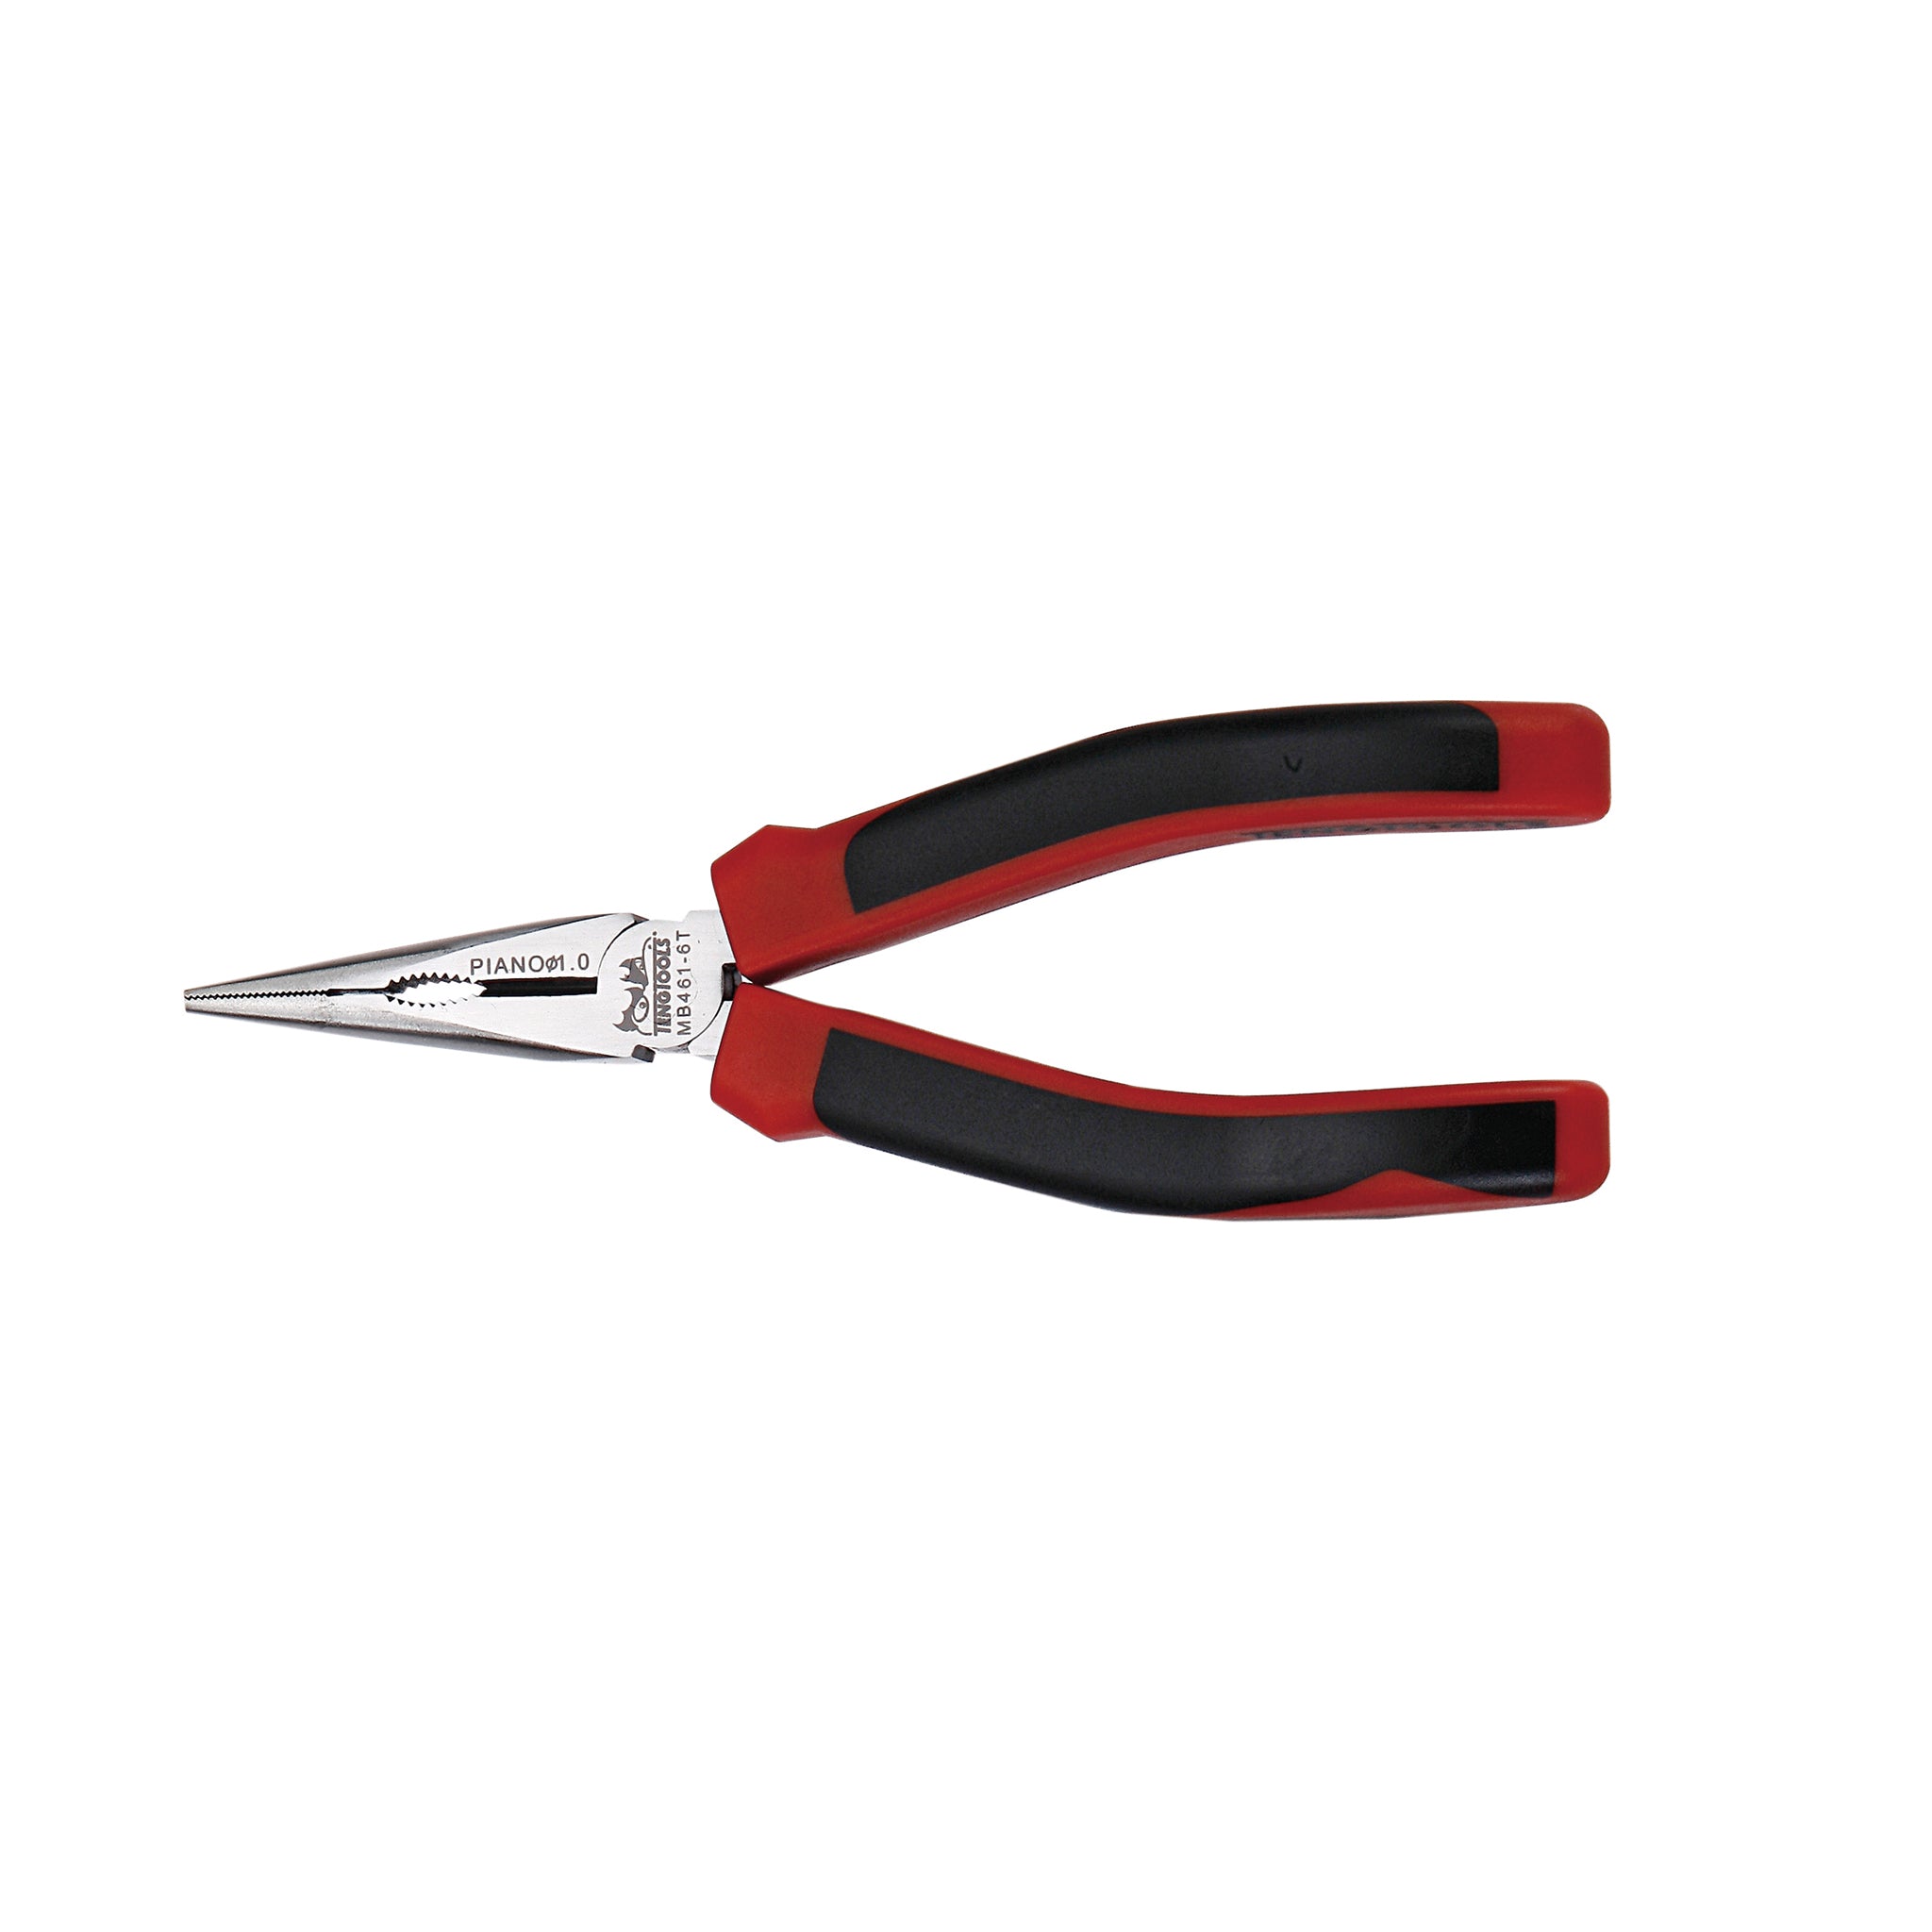 Teng Tools Long Nose Pliers With TPR Grip Handles - 6 Inch